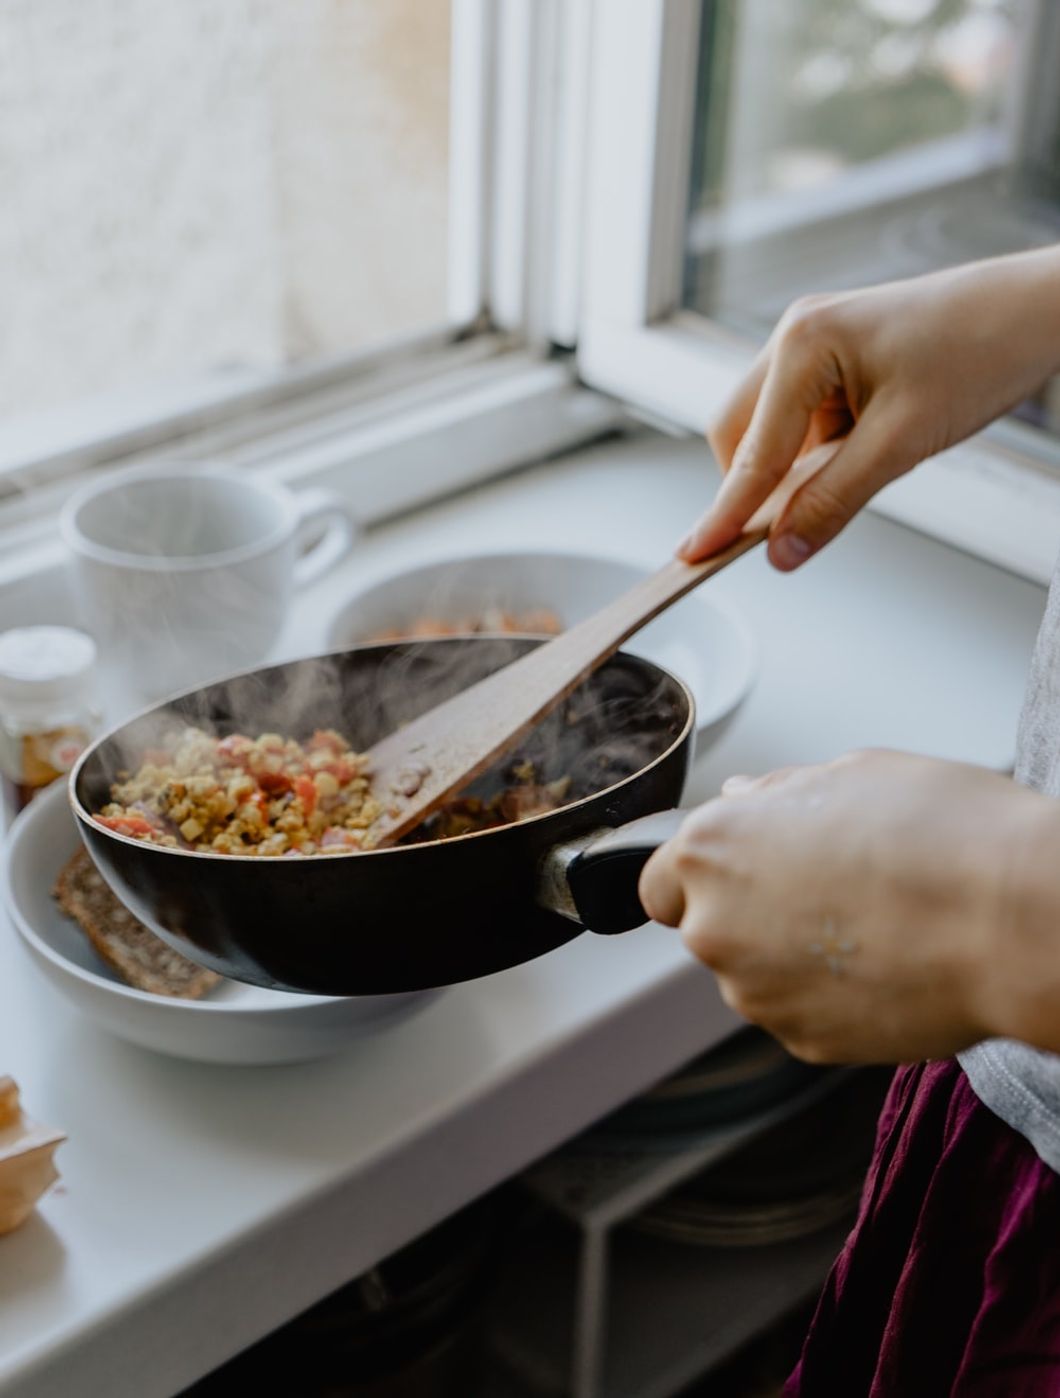 7 Reasons Gen Zers And Millennials Should Learn How To Cook Homemade Meals From Scratch